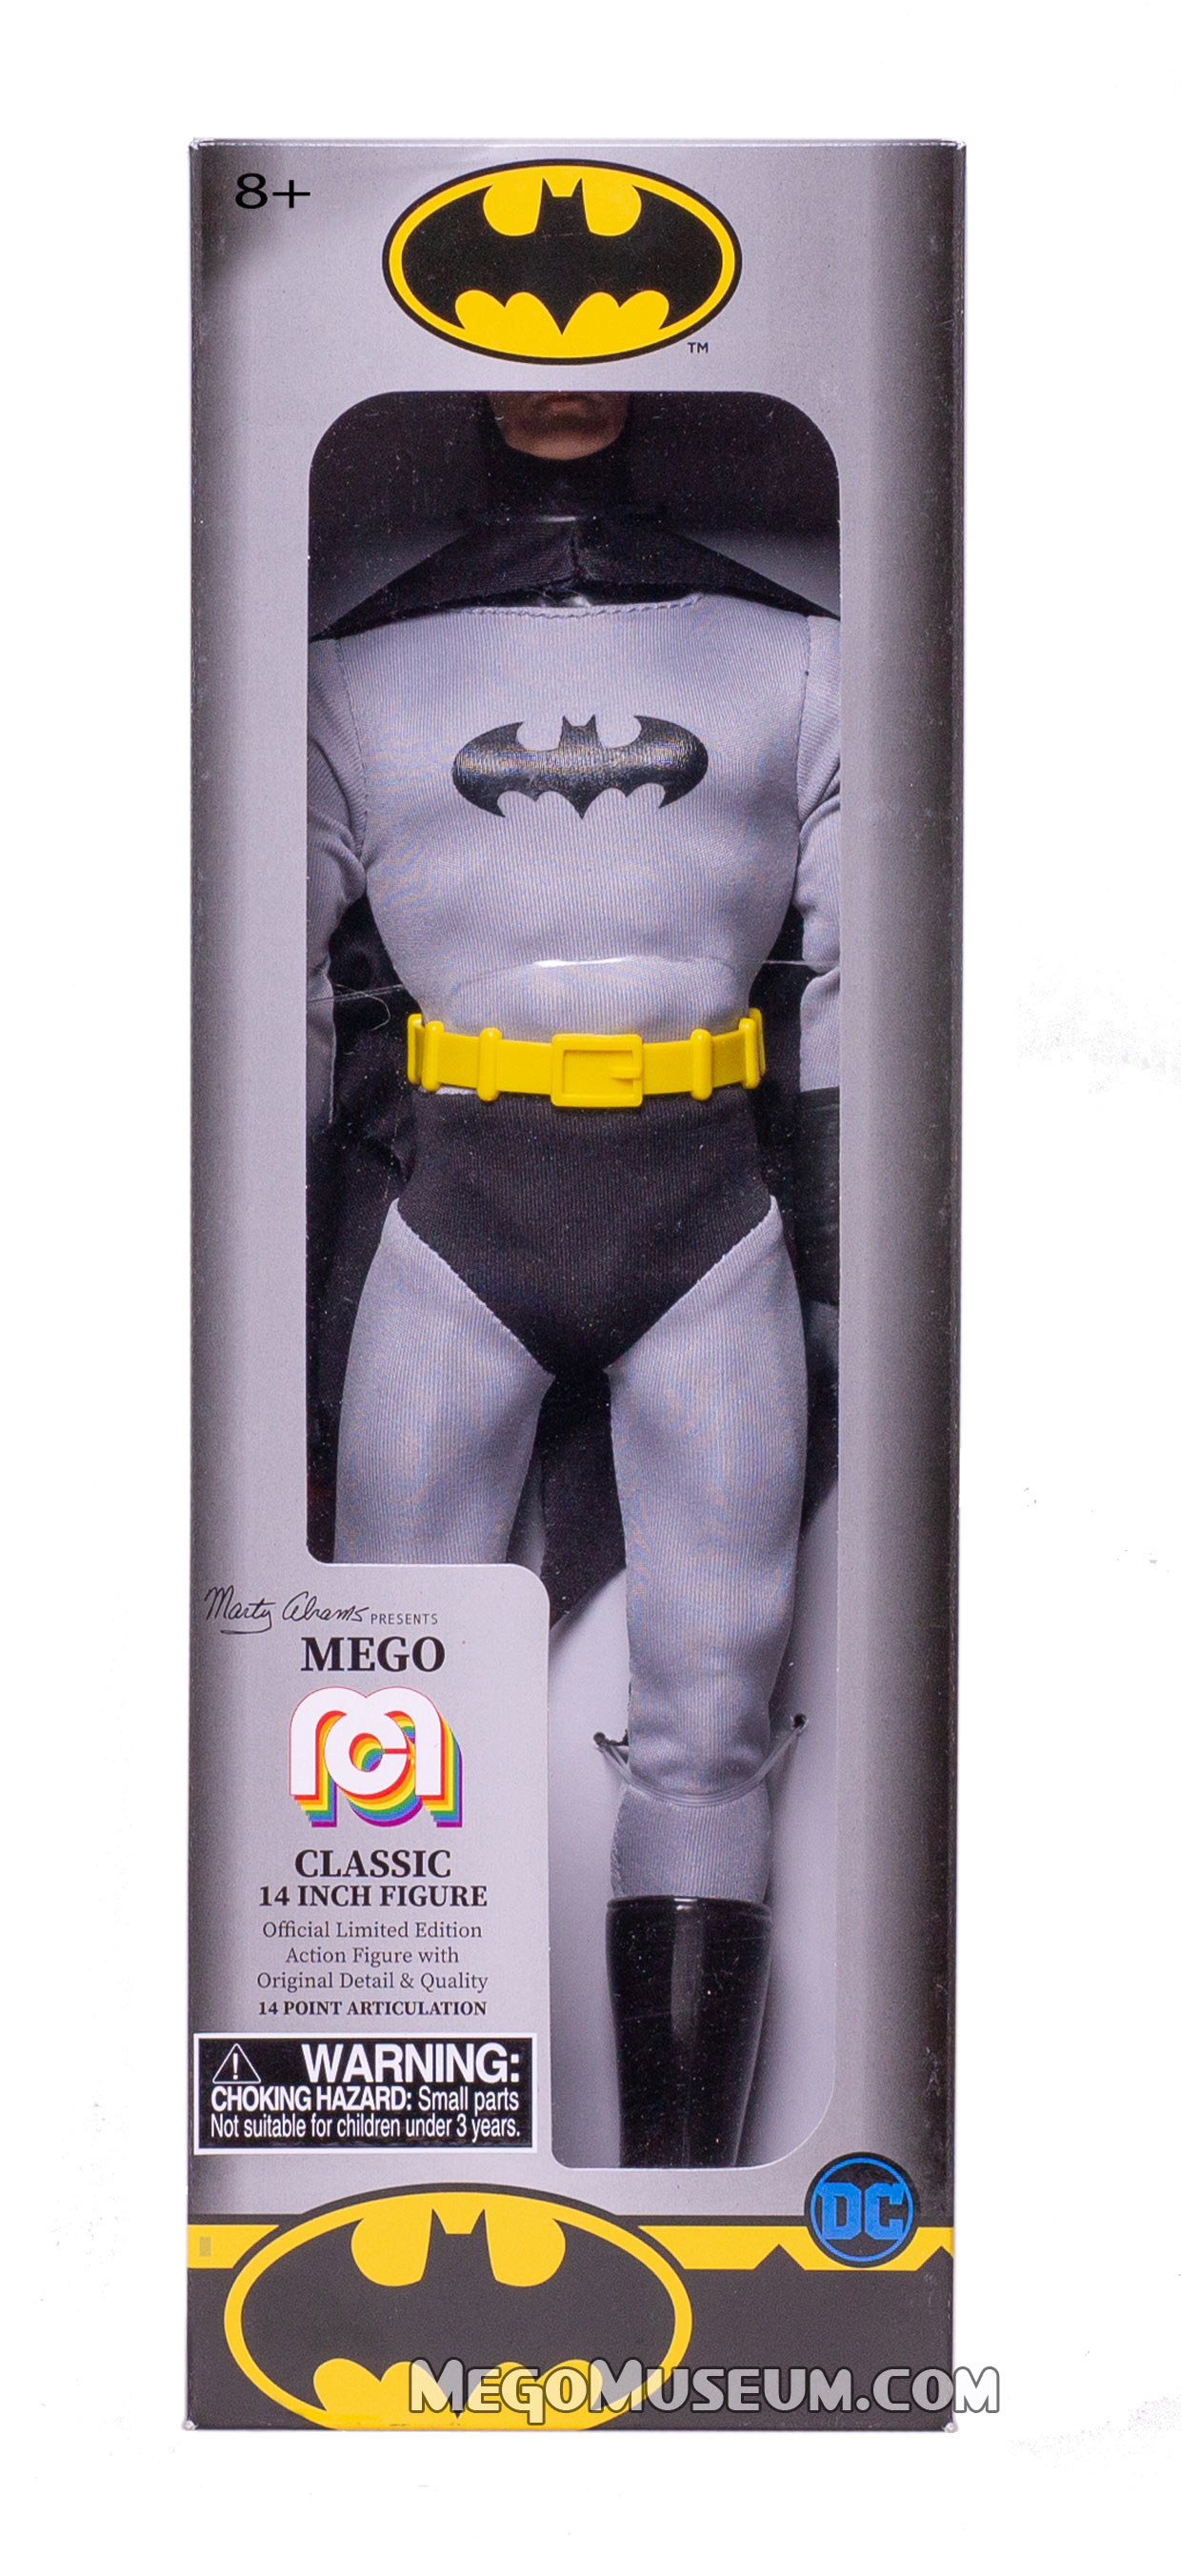 BATMAN DC Classic 14 Inch Figure Brand New Unopened 2018 Marty Abrams Mego 